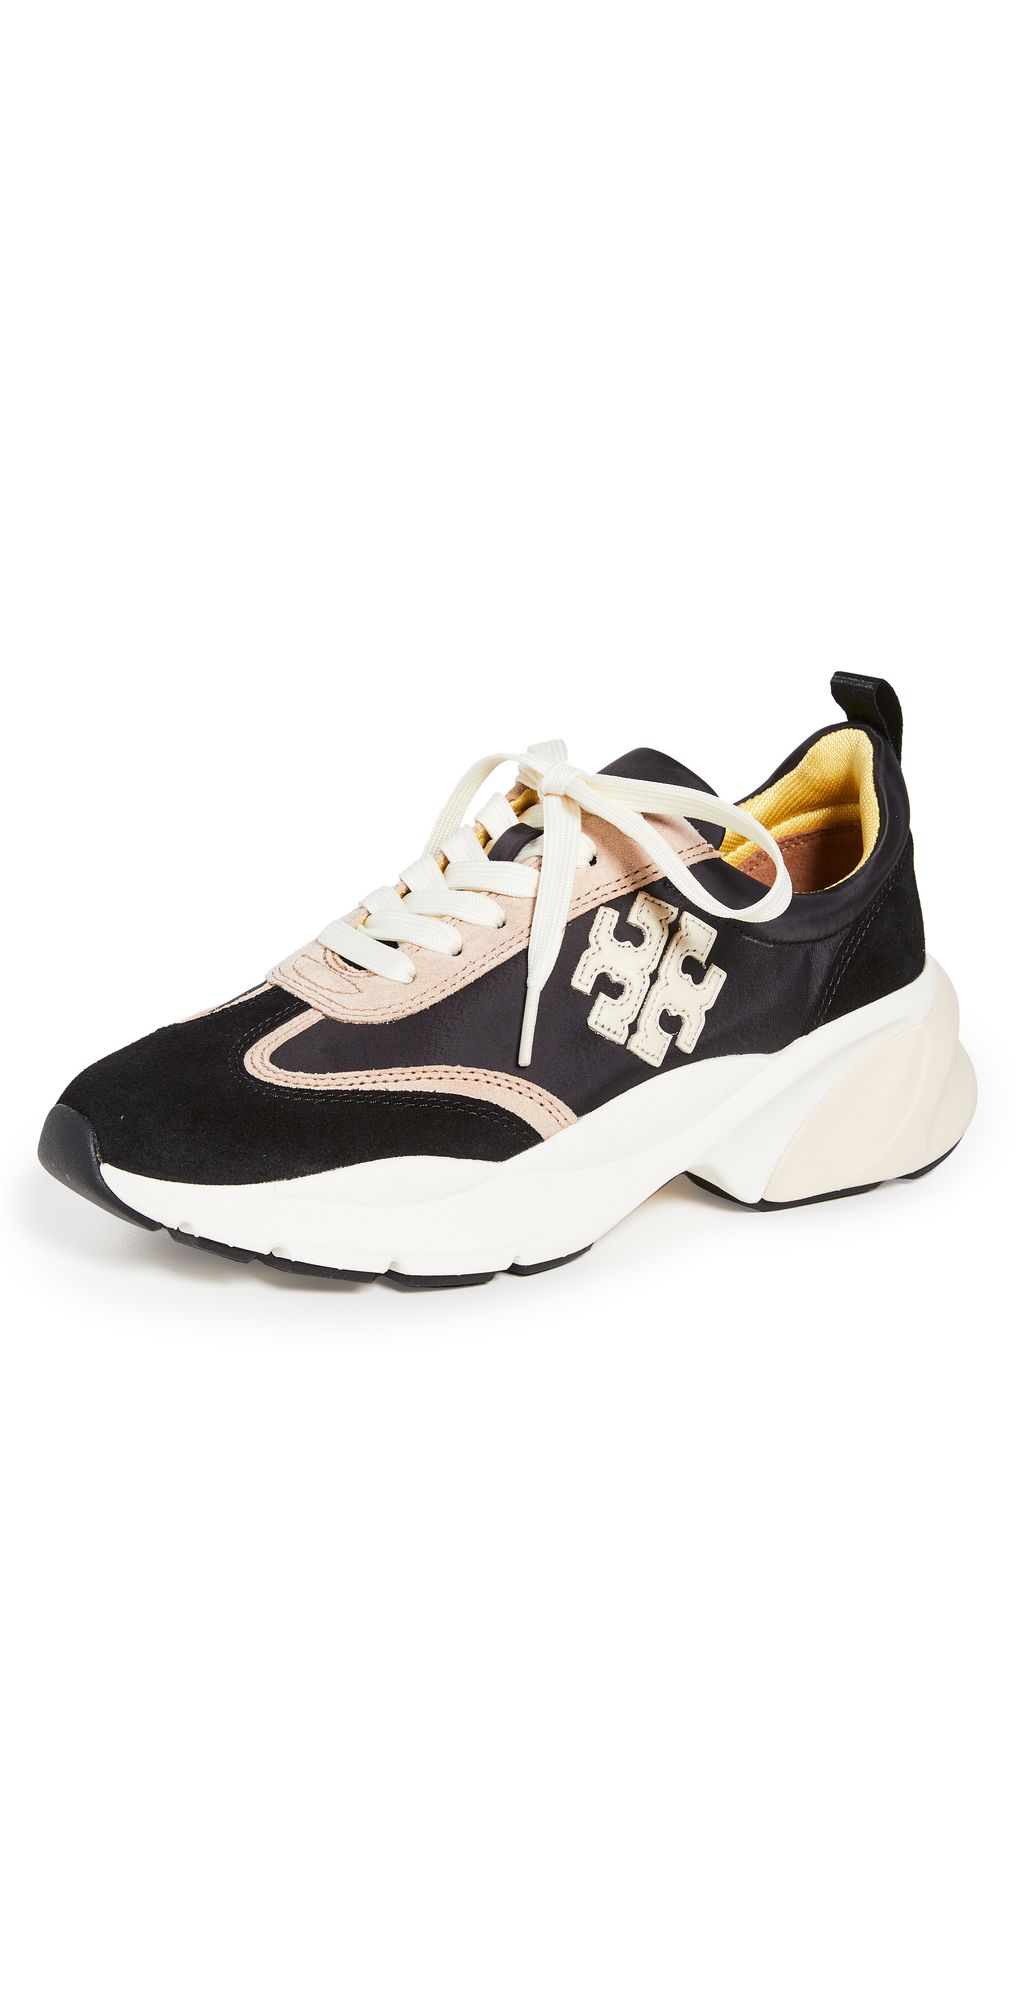 Tory Burch Good Luck Trainer Sneakers | Shopbop